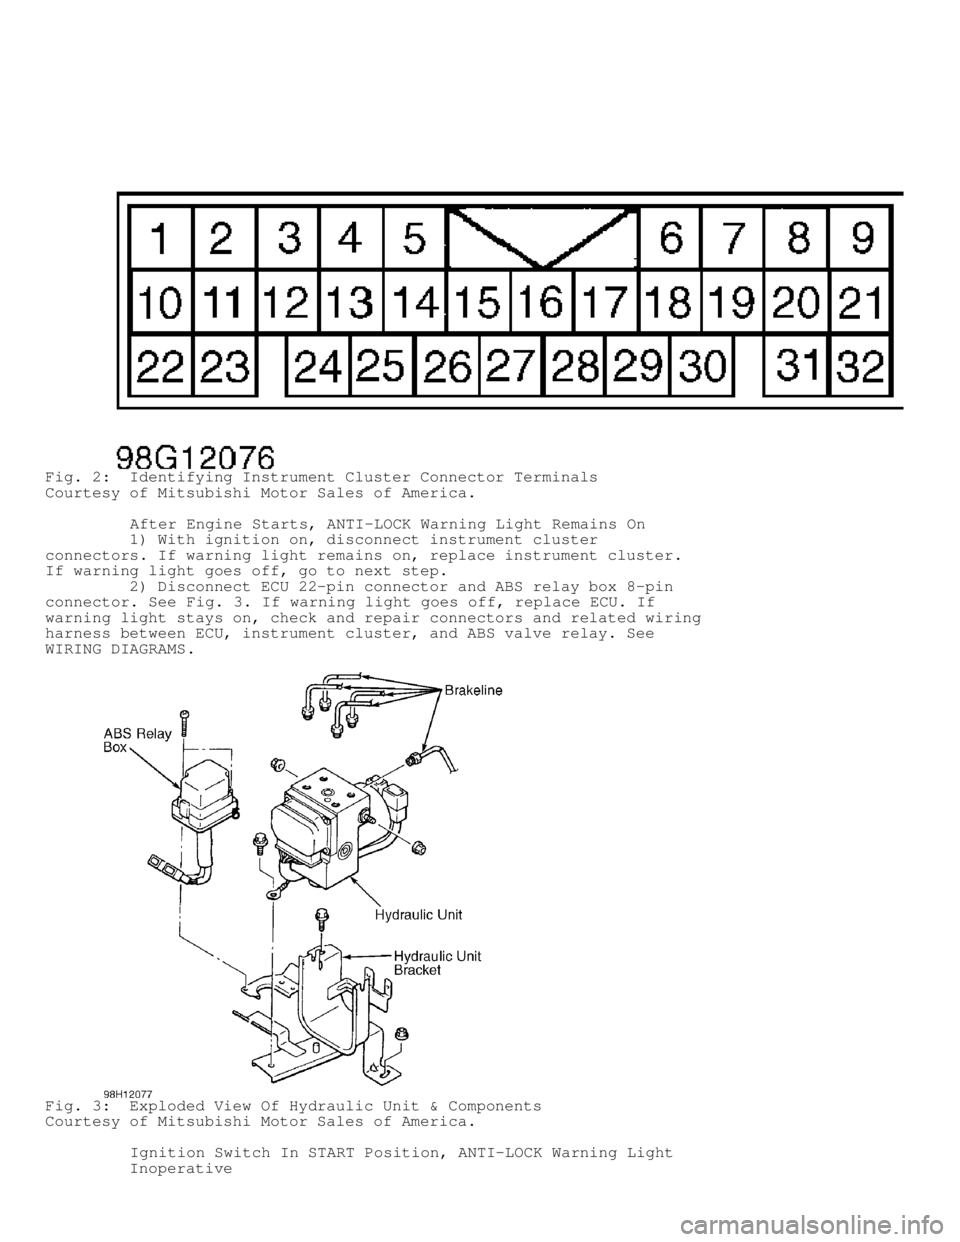 MITSUBISHI MONTERO 1998  Service Manual Fig. 2:  Identifying Instrument Cluster Connector Terminals
Courtesy of Mitsubishi Motor Sales of America.
         After Engine Starts, ANTI-LOCK Warning Light Remains On
         1) With ignition on